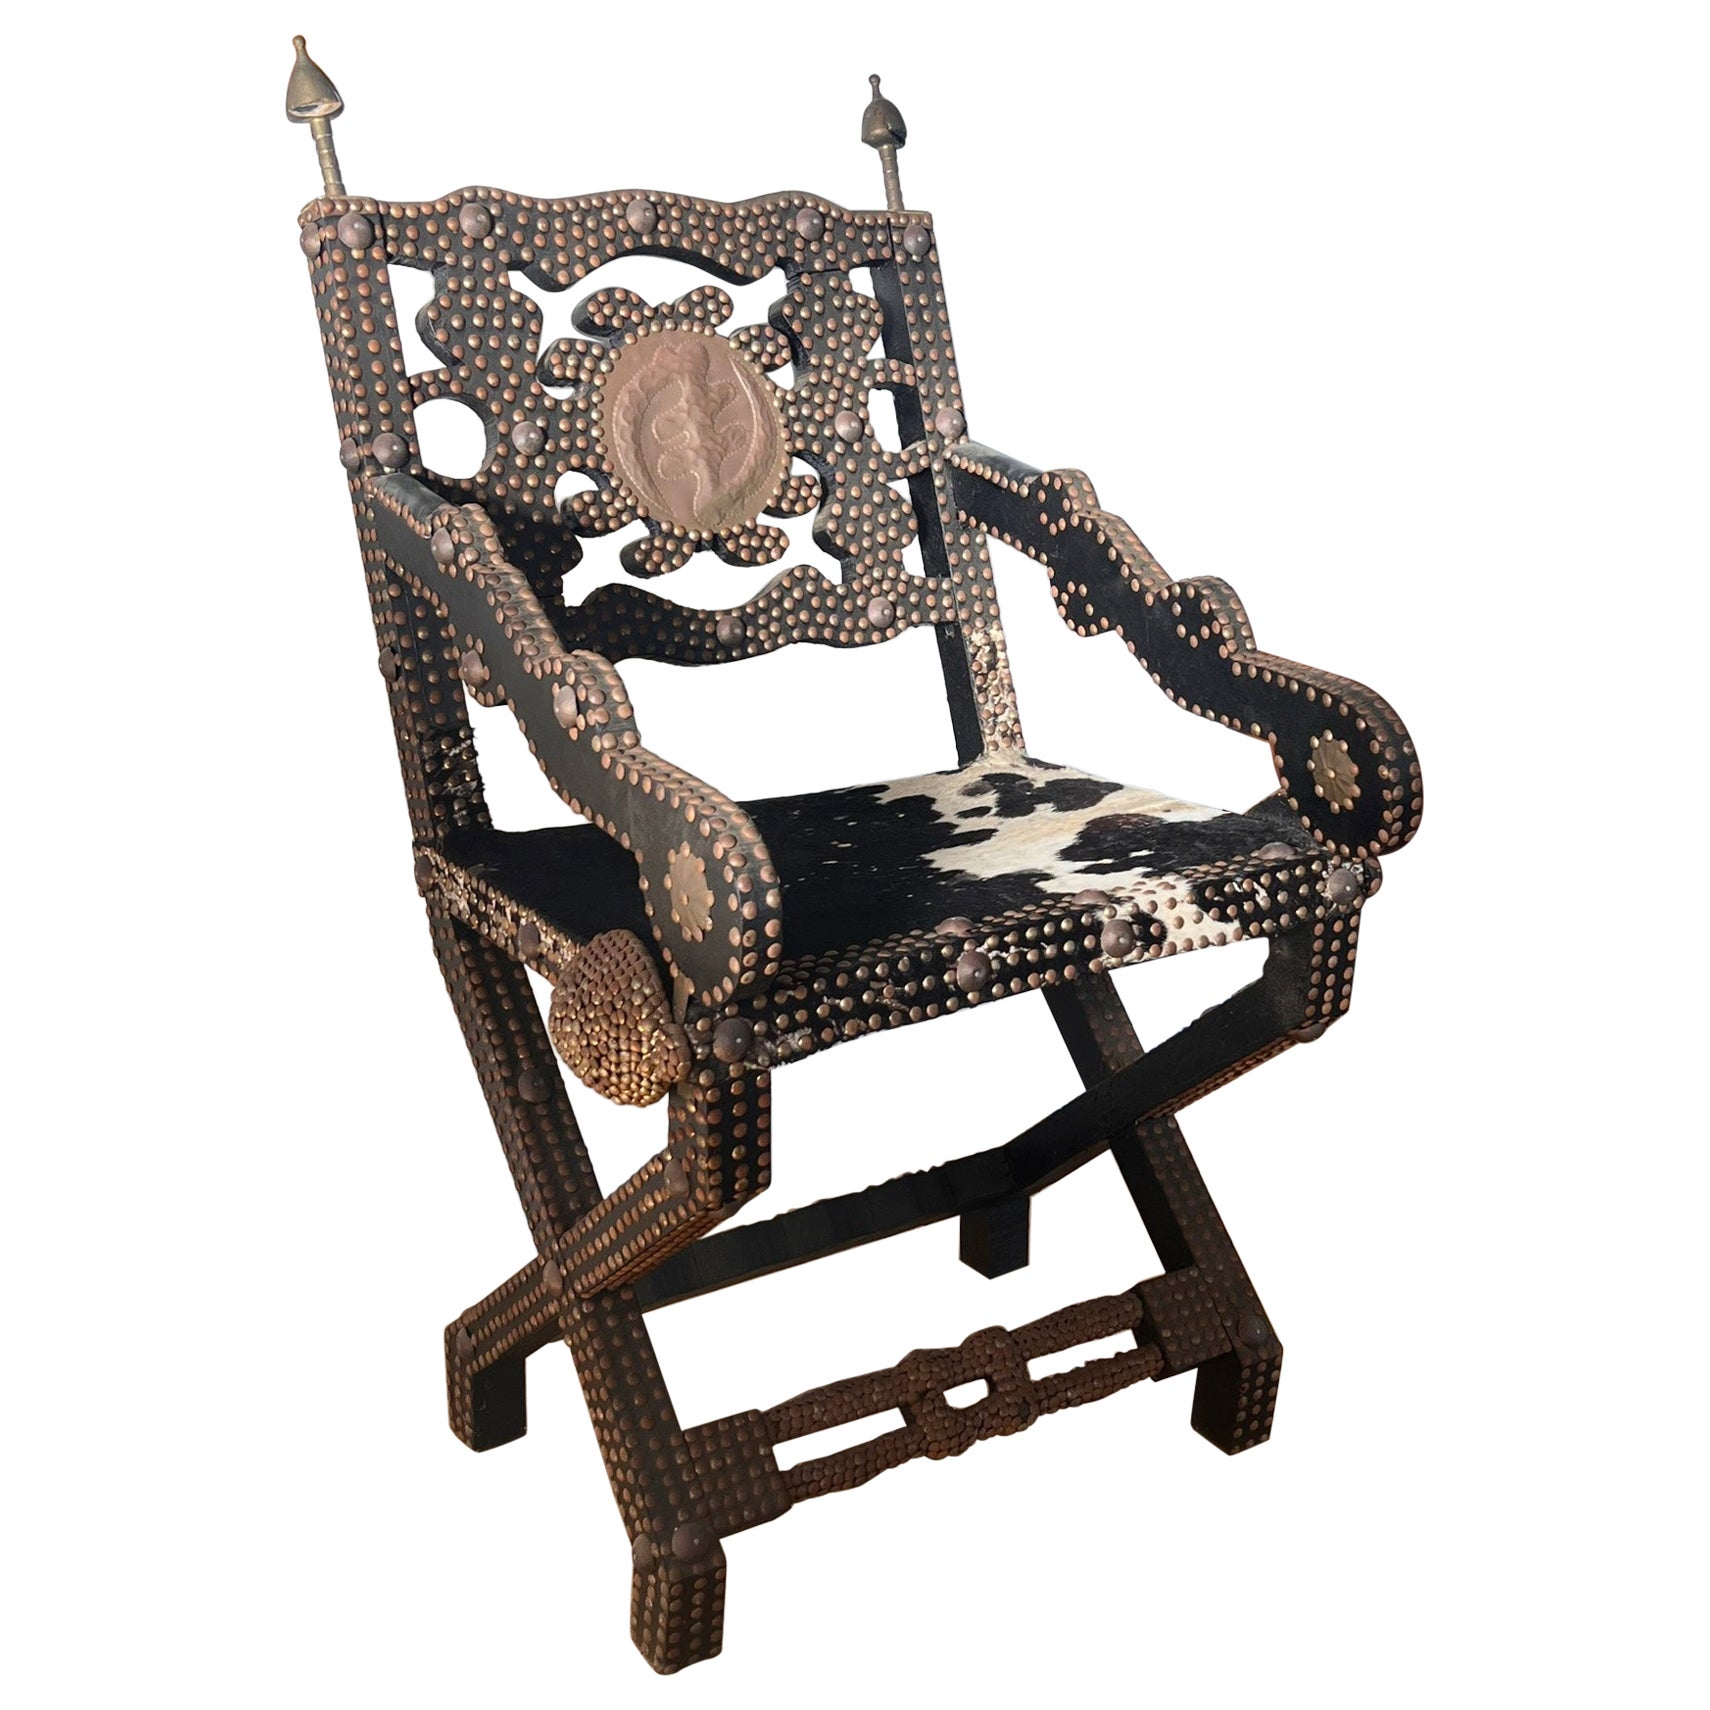 Ghanaian wood, iron, and cowhide chair, early 20th century